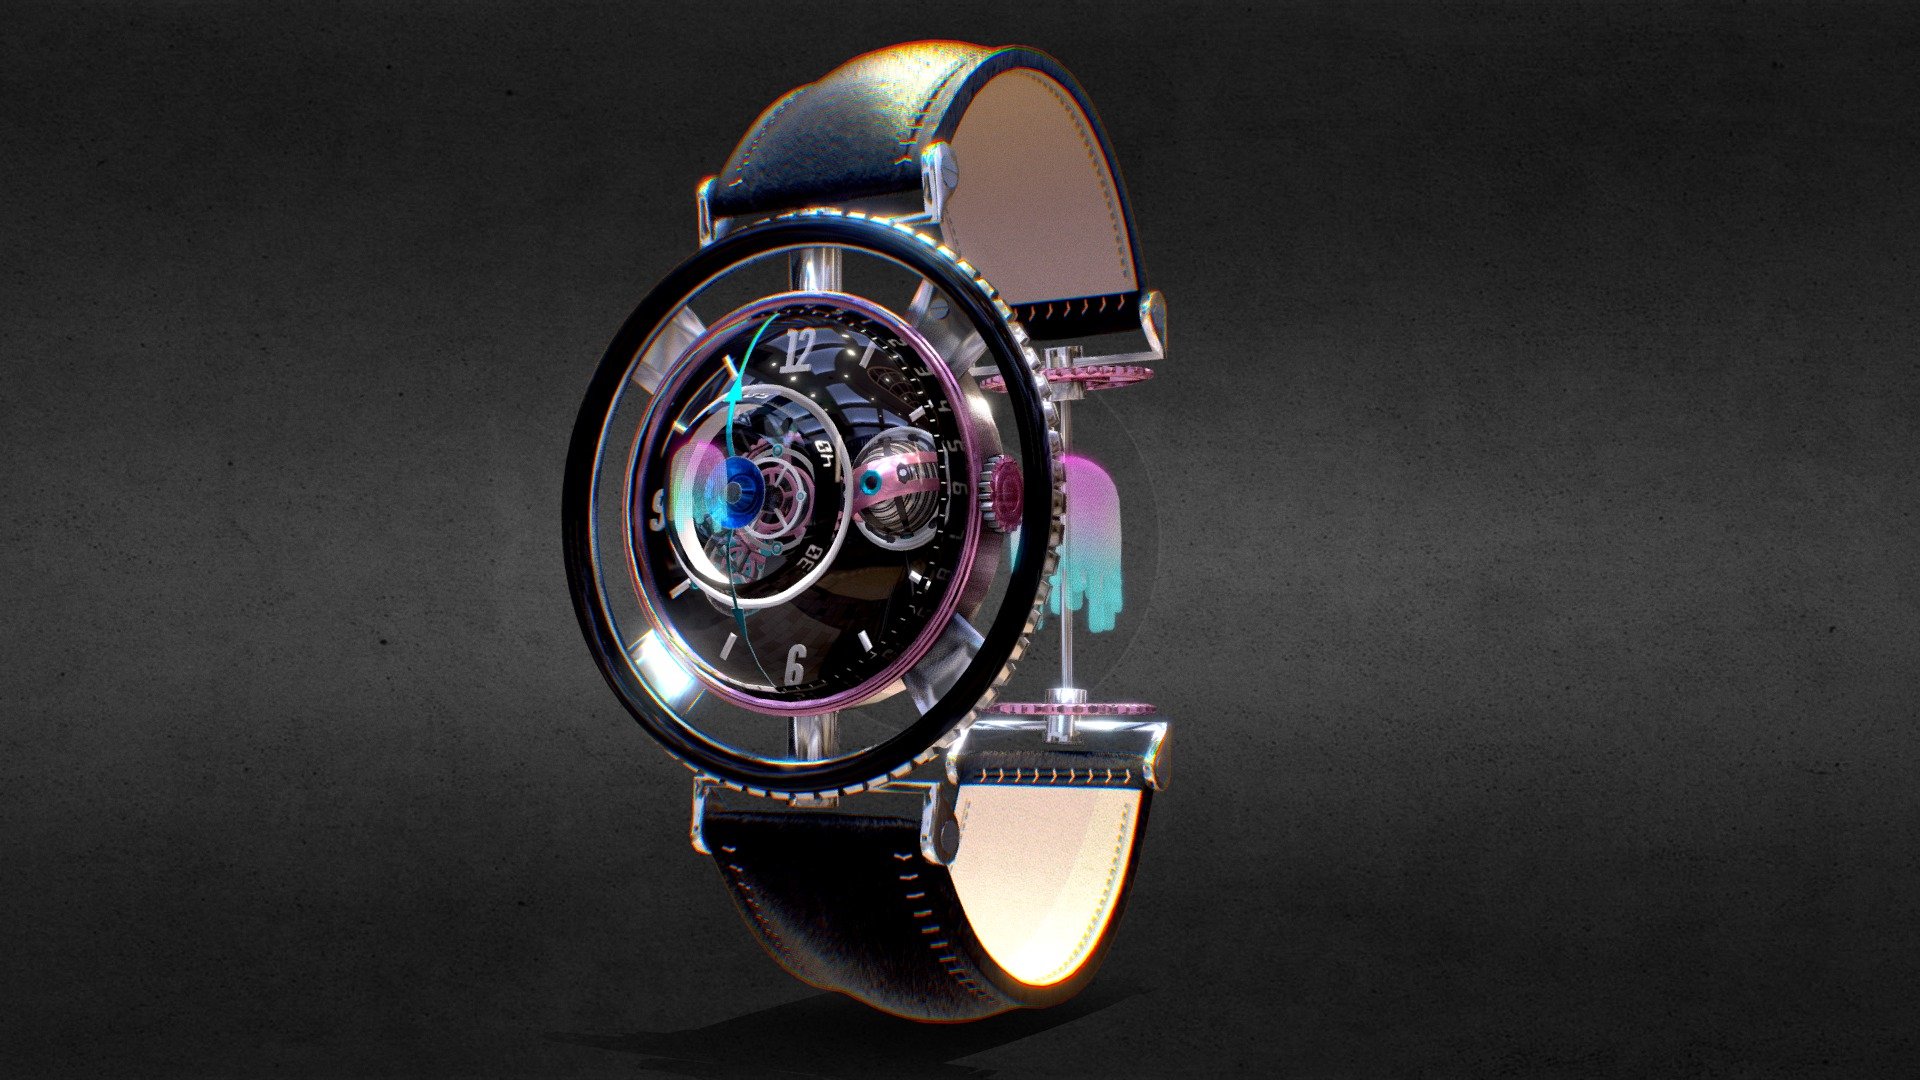 Awersome stainless steel AAVE Coin Watch.

Currently available for download in FBX format.

3D model developed by AR-Watches 3d model